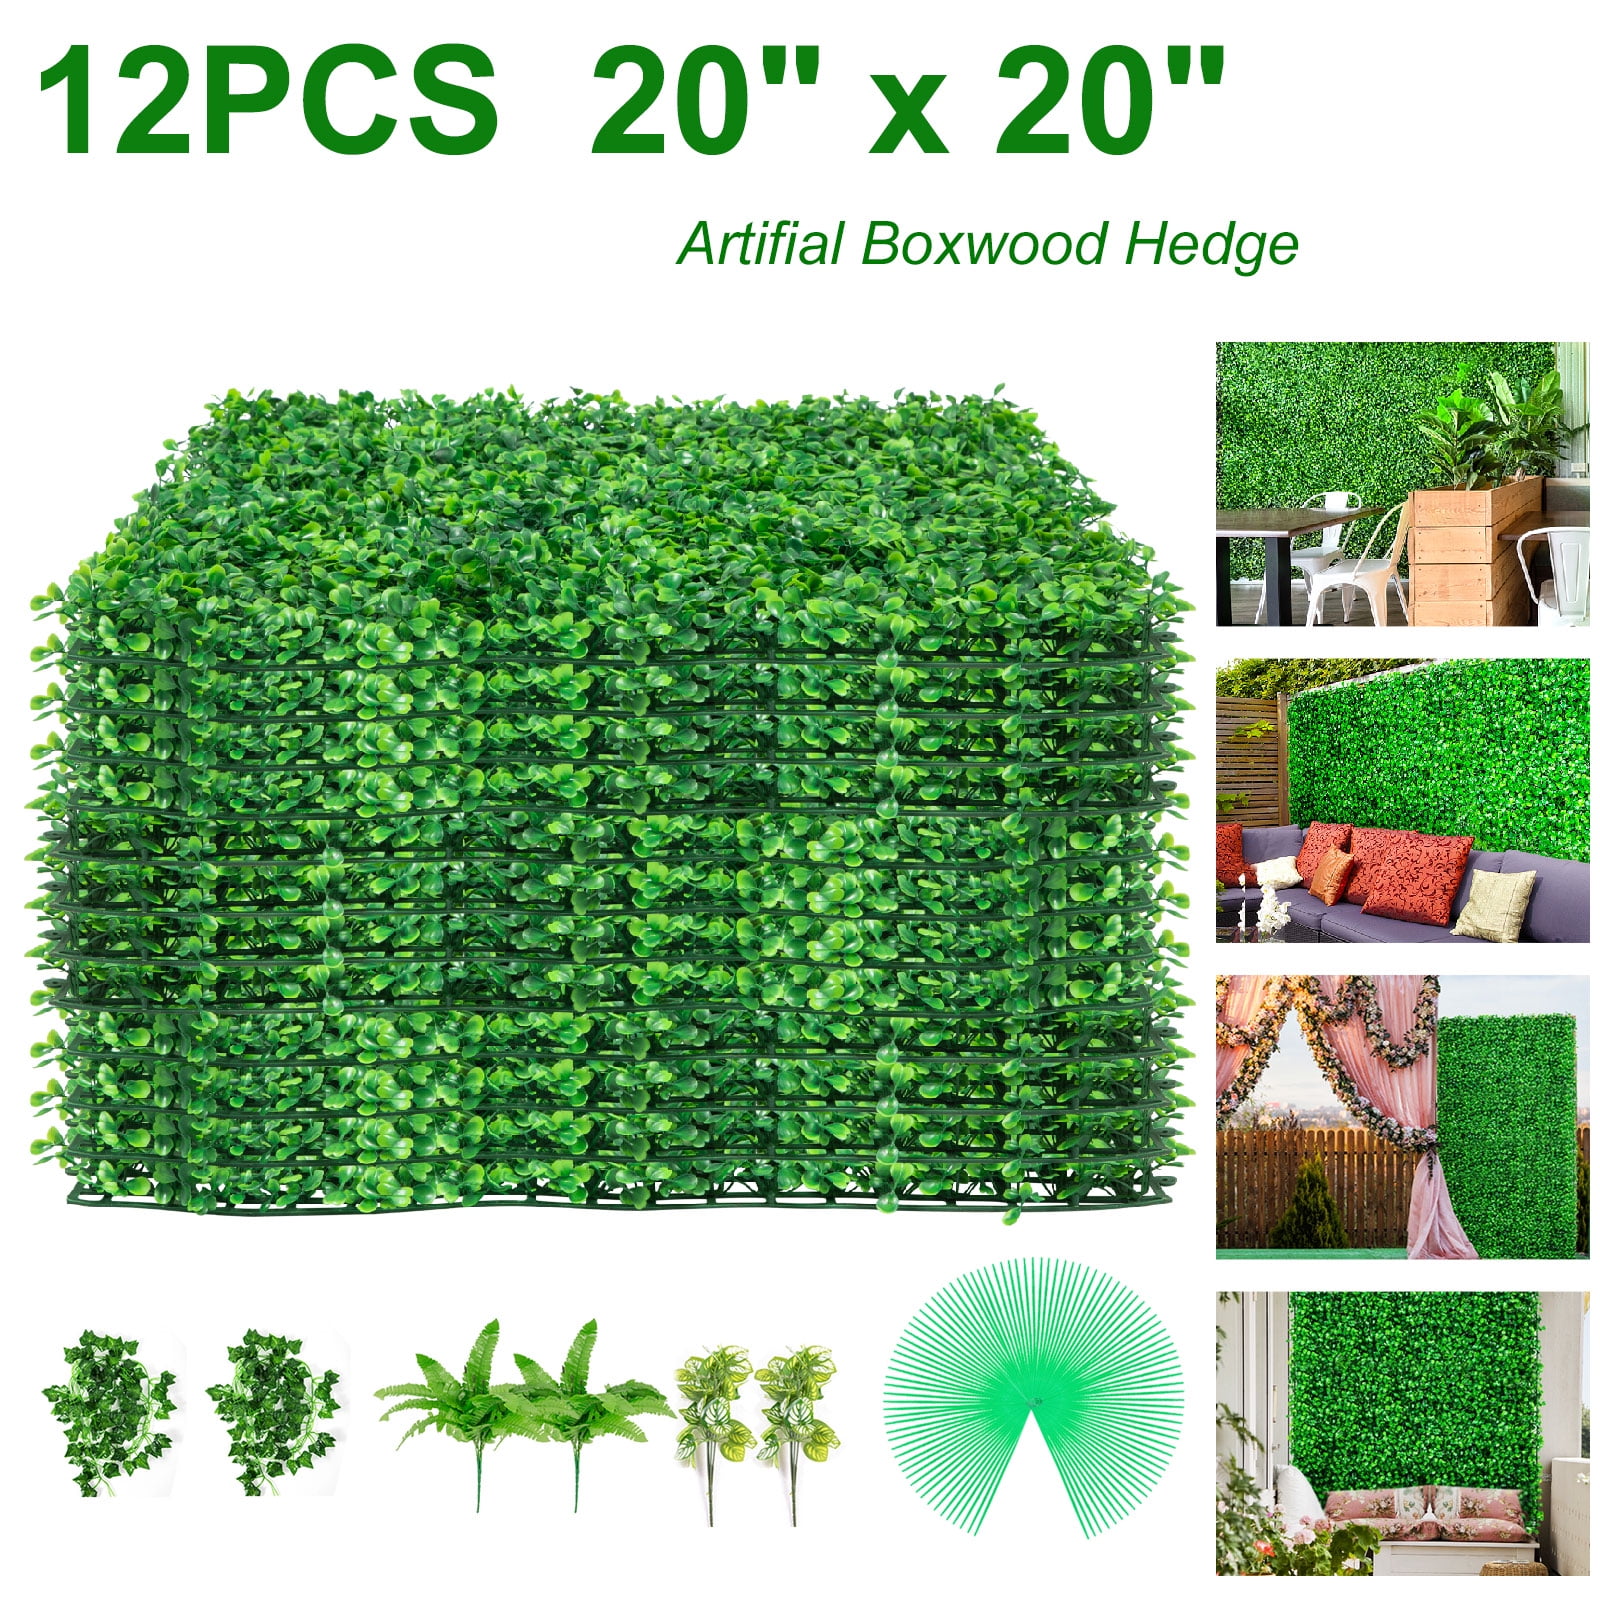 12 PCs 24x16" Artificial Grass Panel Milan Wall Boxwood Hedge Mat Privacy Fence 